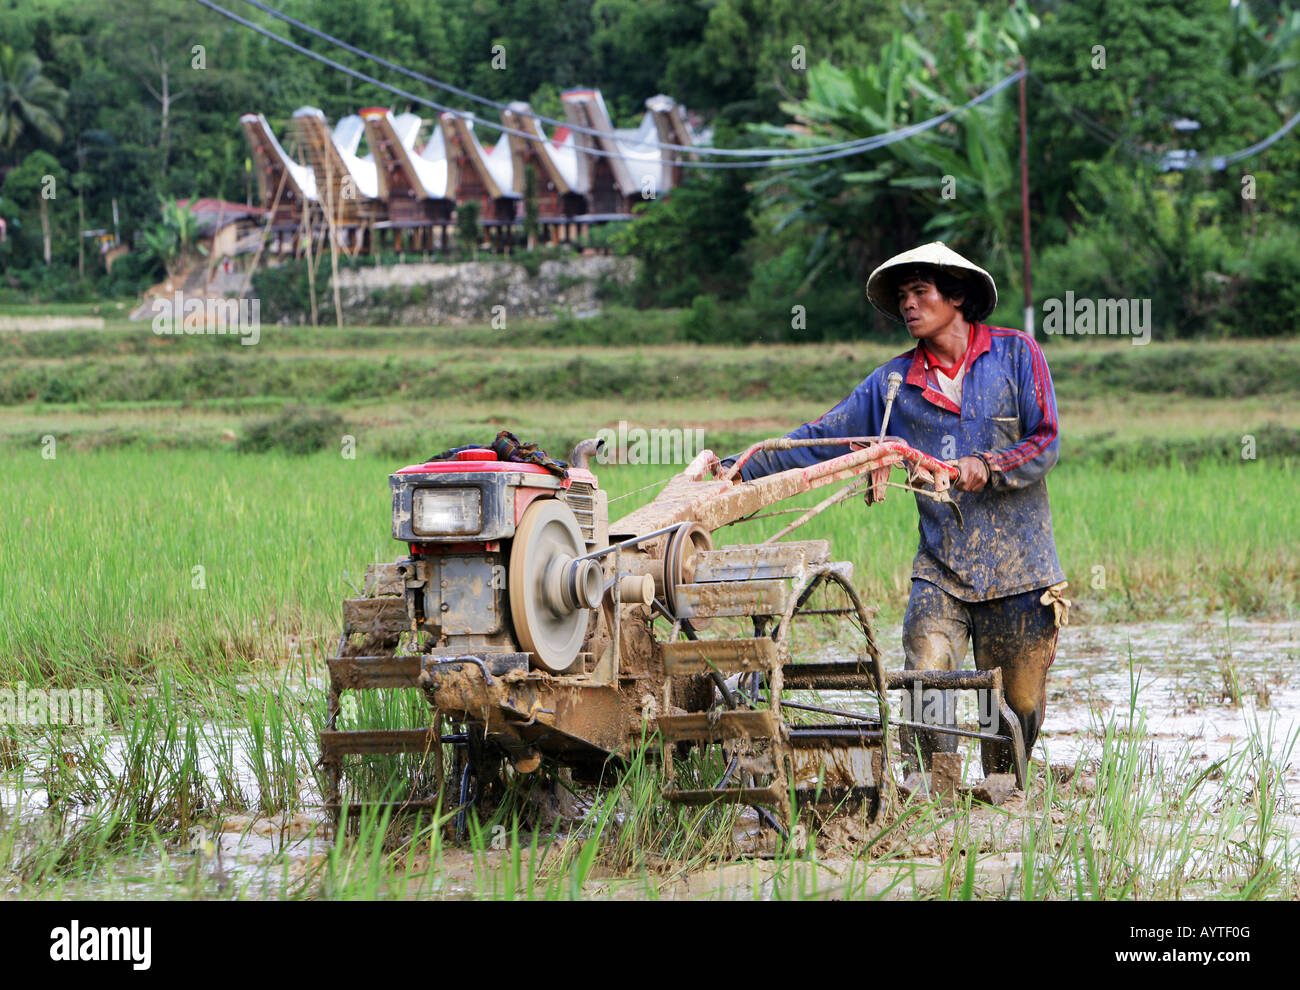 Indonesia, man plowing rice field with a tractor, Sulawesi Island near Rantepao Stock Photo